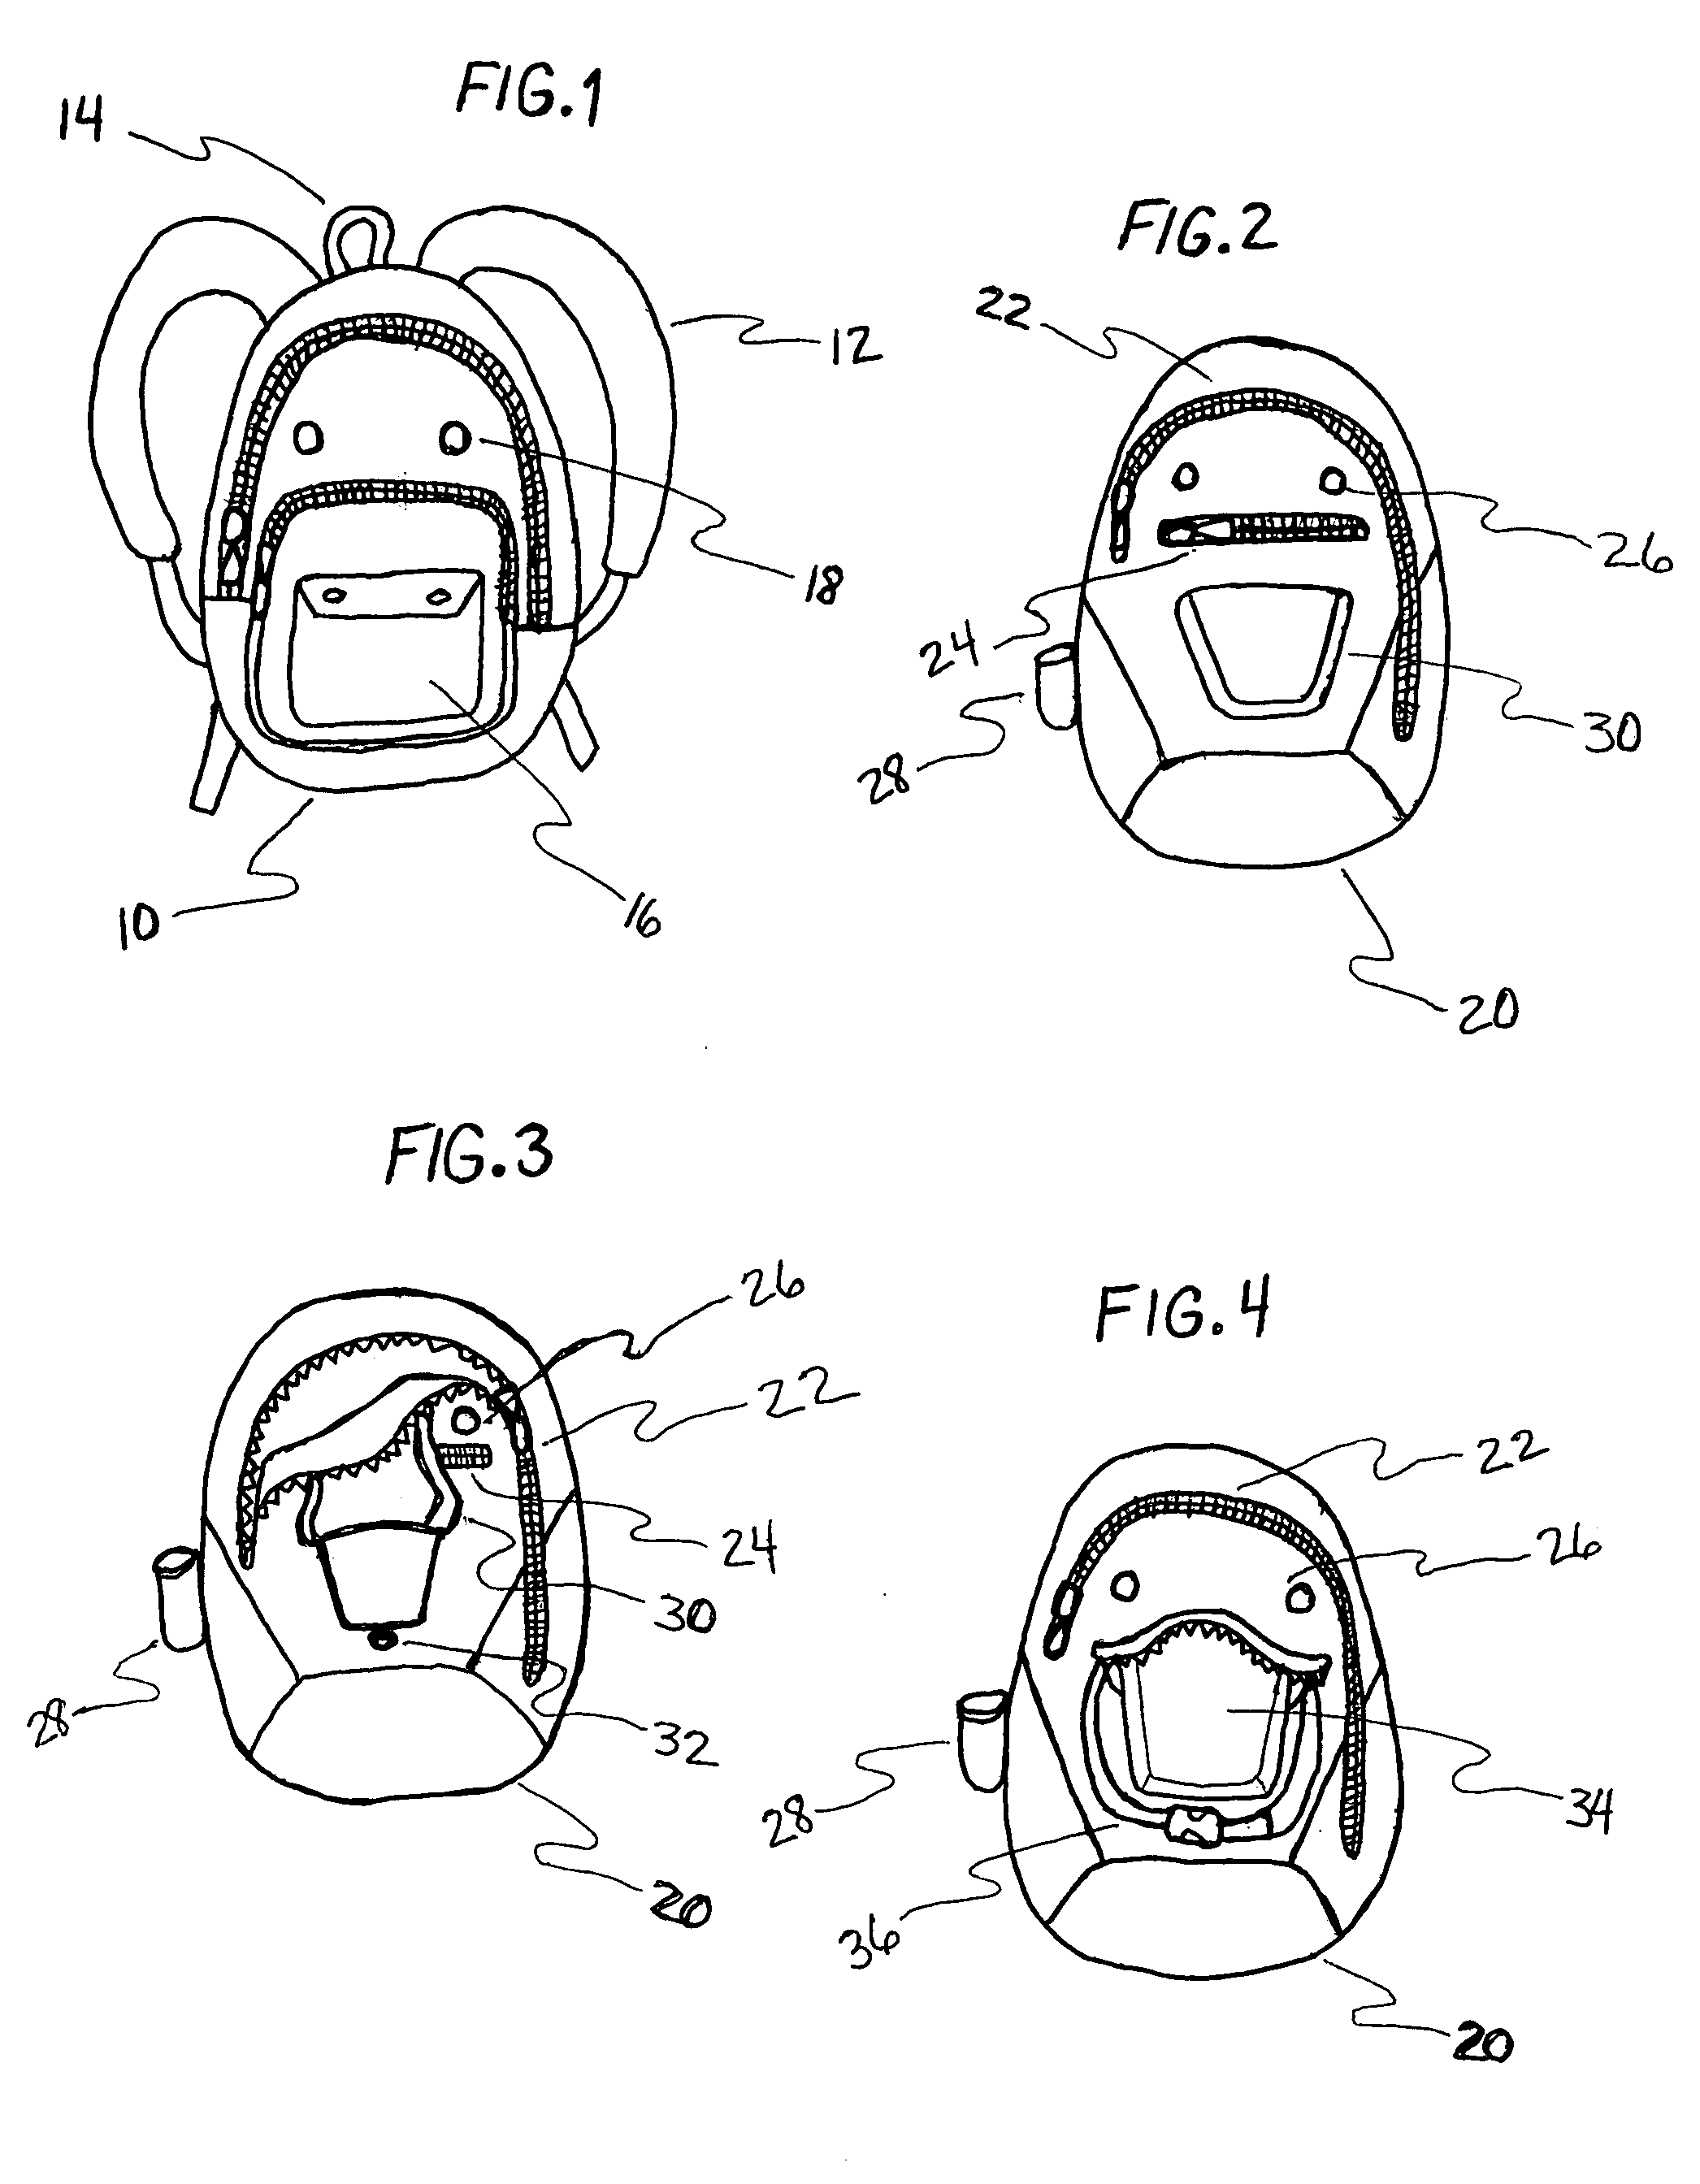 Multiple-use cover with see through carrying article